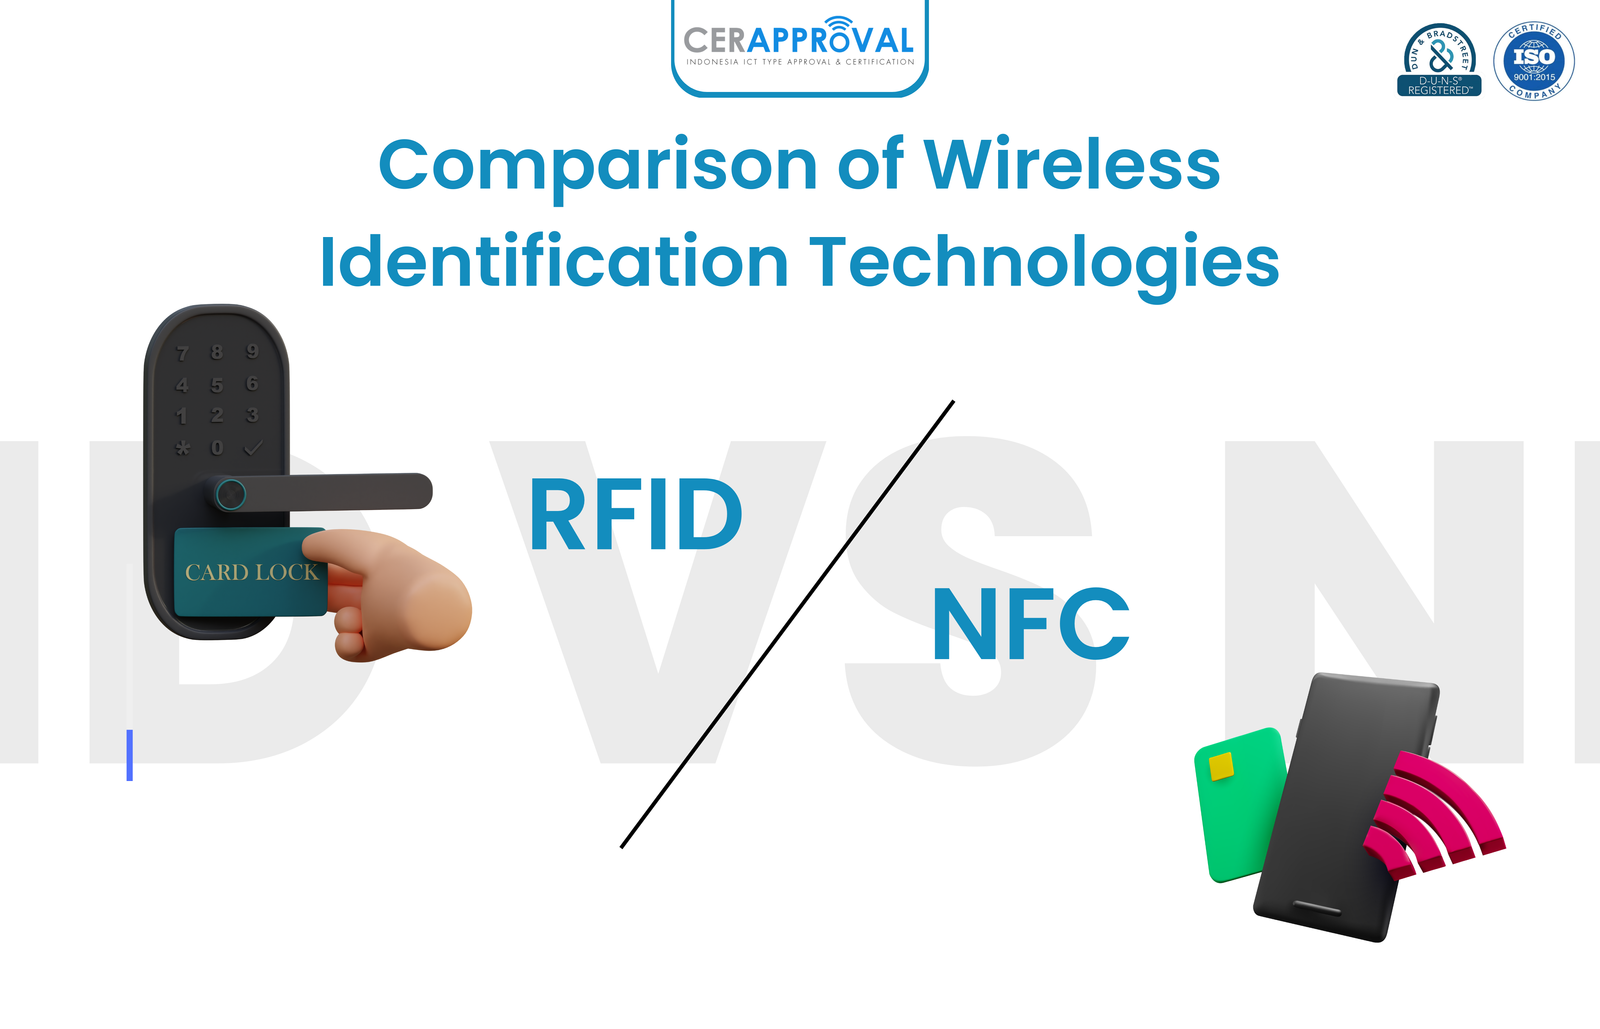 WIRELESS IDENTIFICATION TECHNOLOGY COMPARISON: RFID and NFC